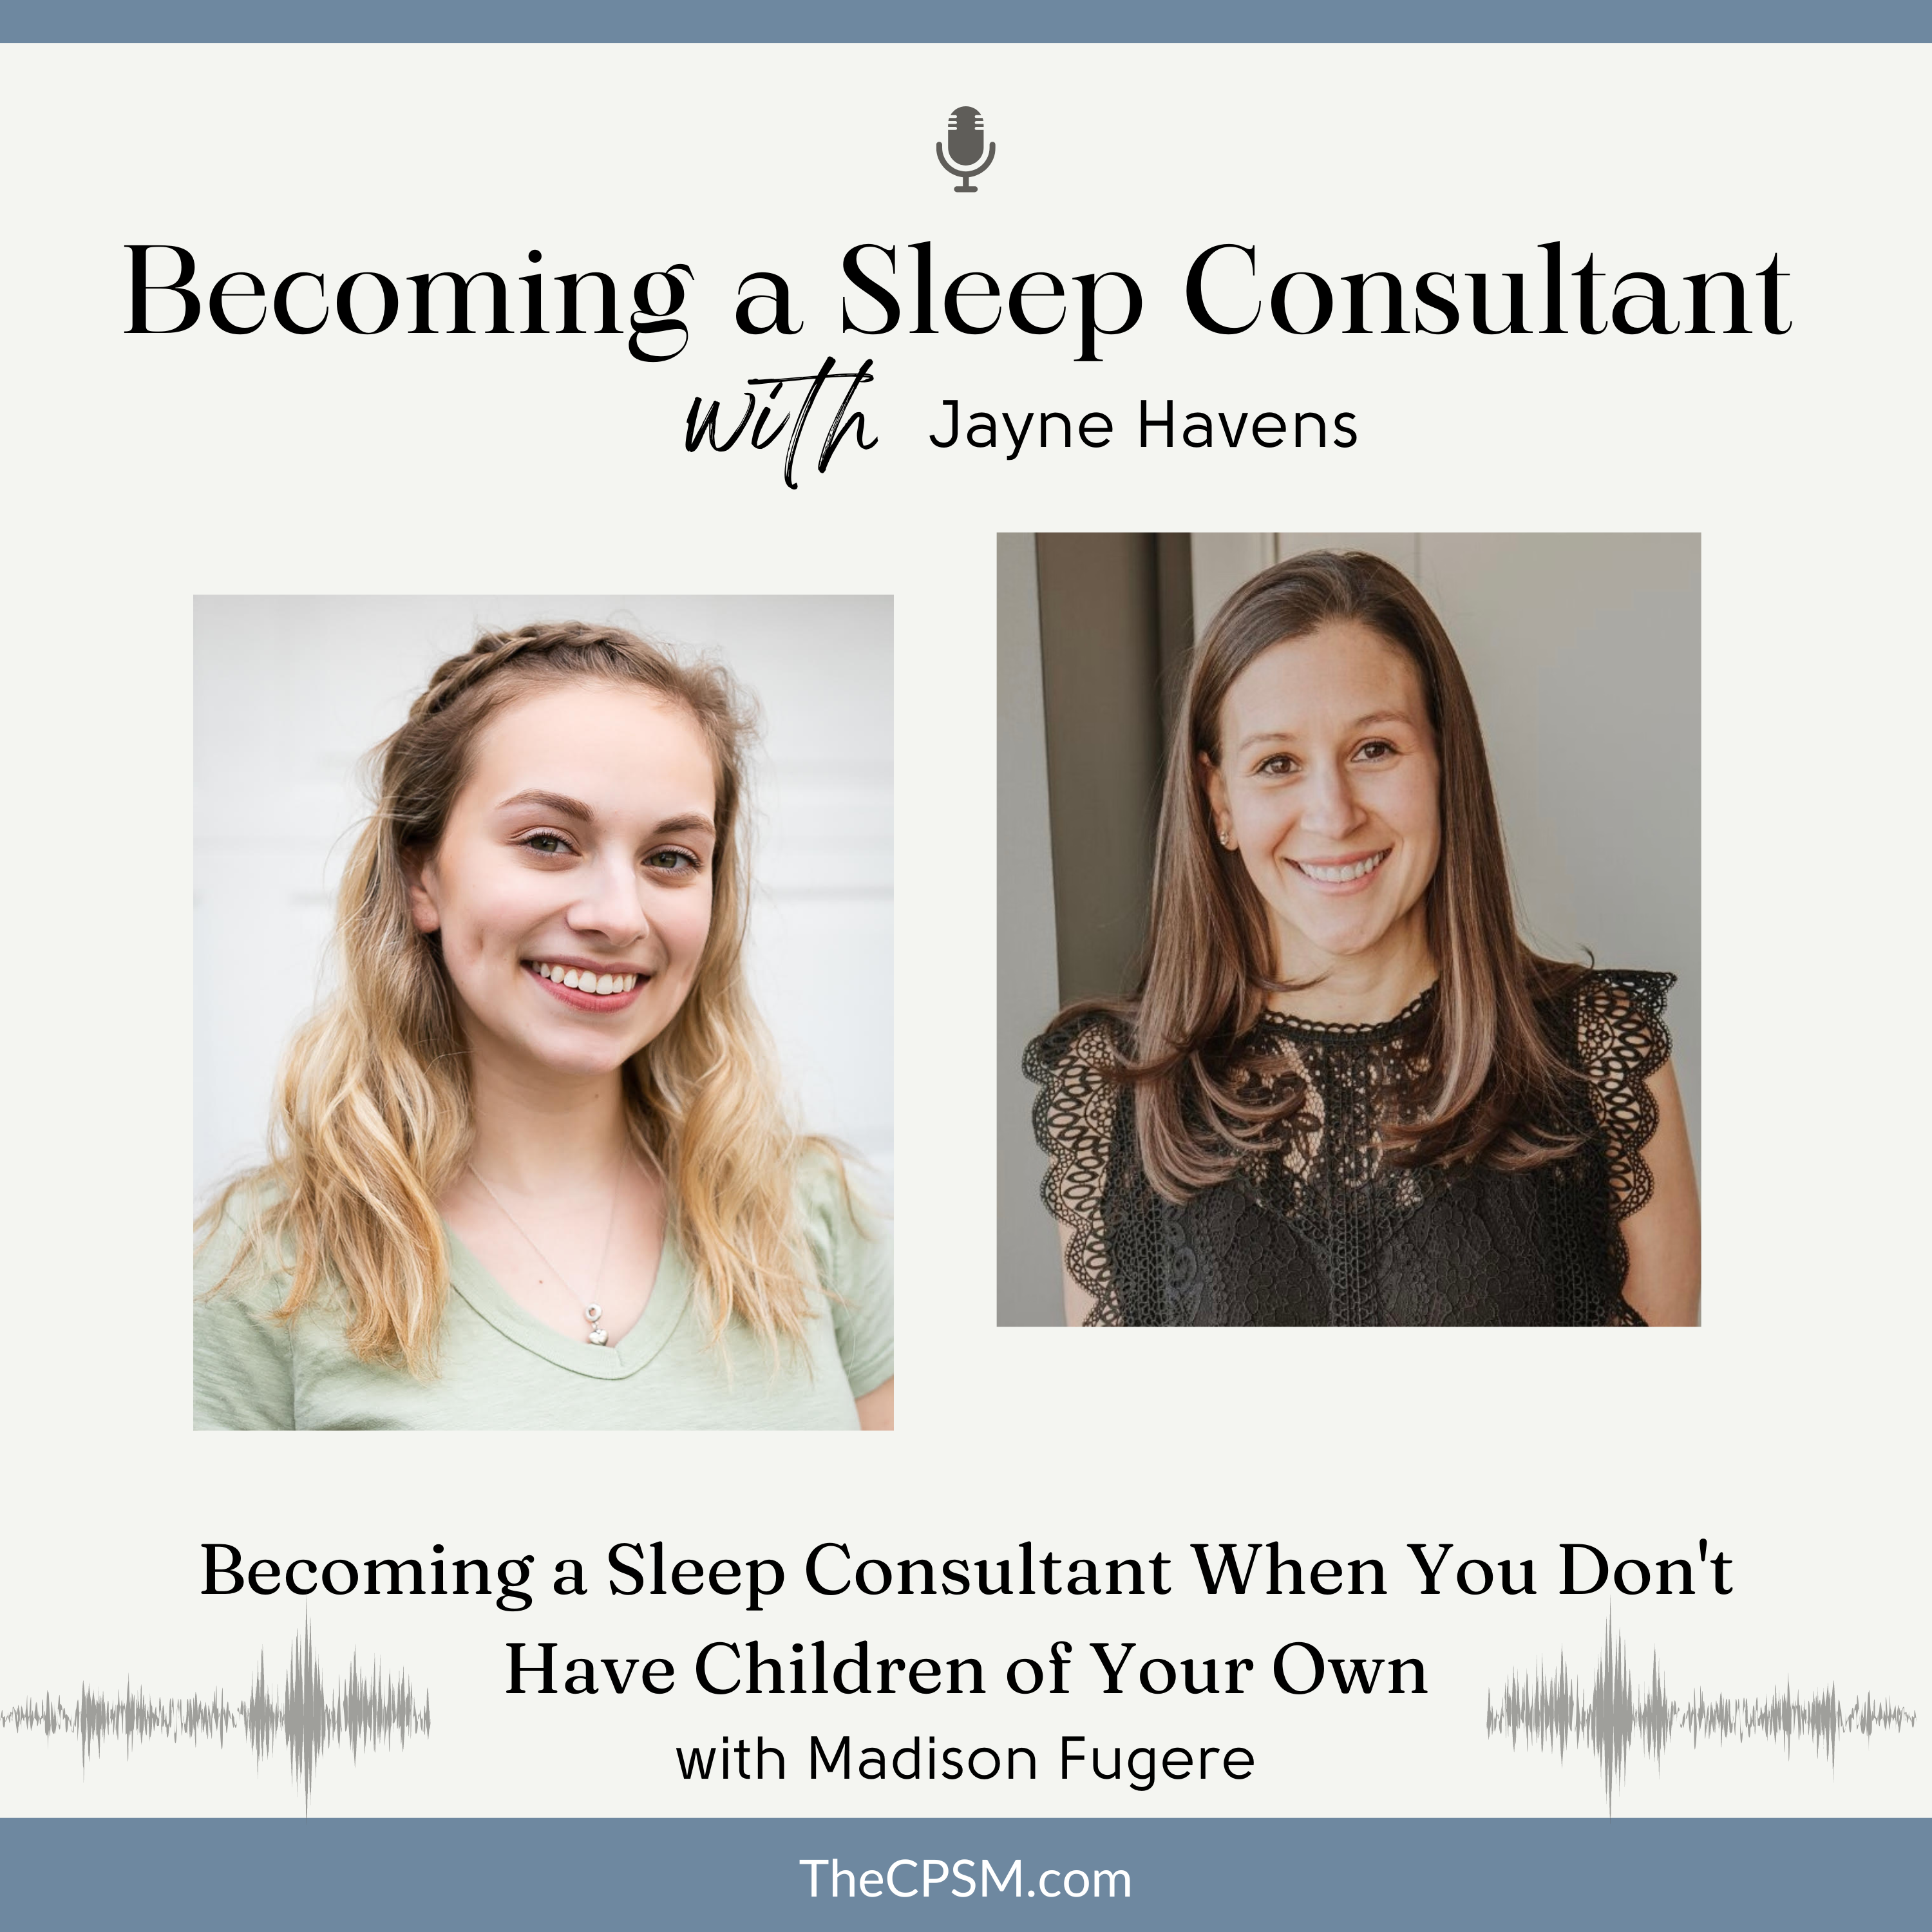 Becoming a Sleep Consultant When You Don't Have Children of Your Own